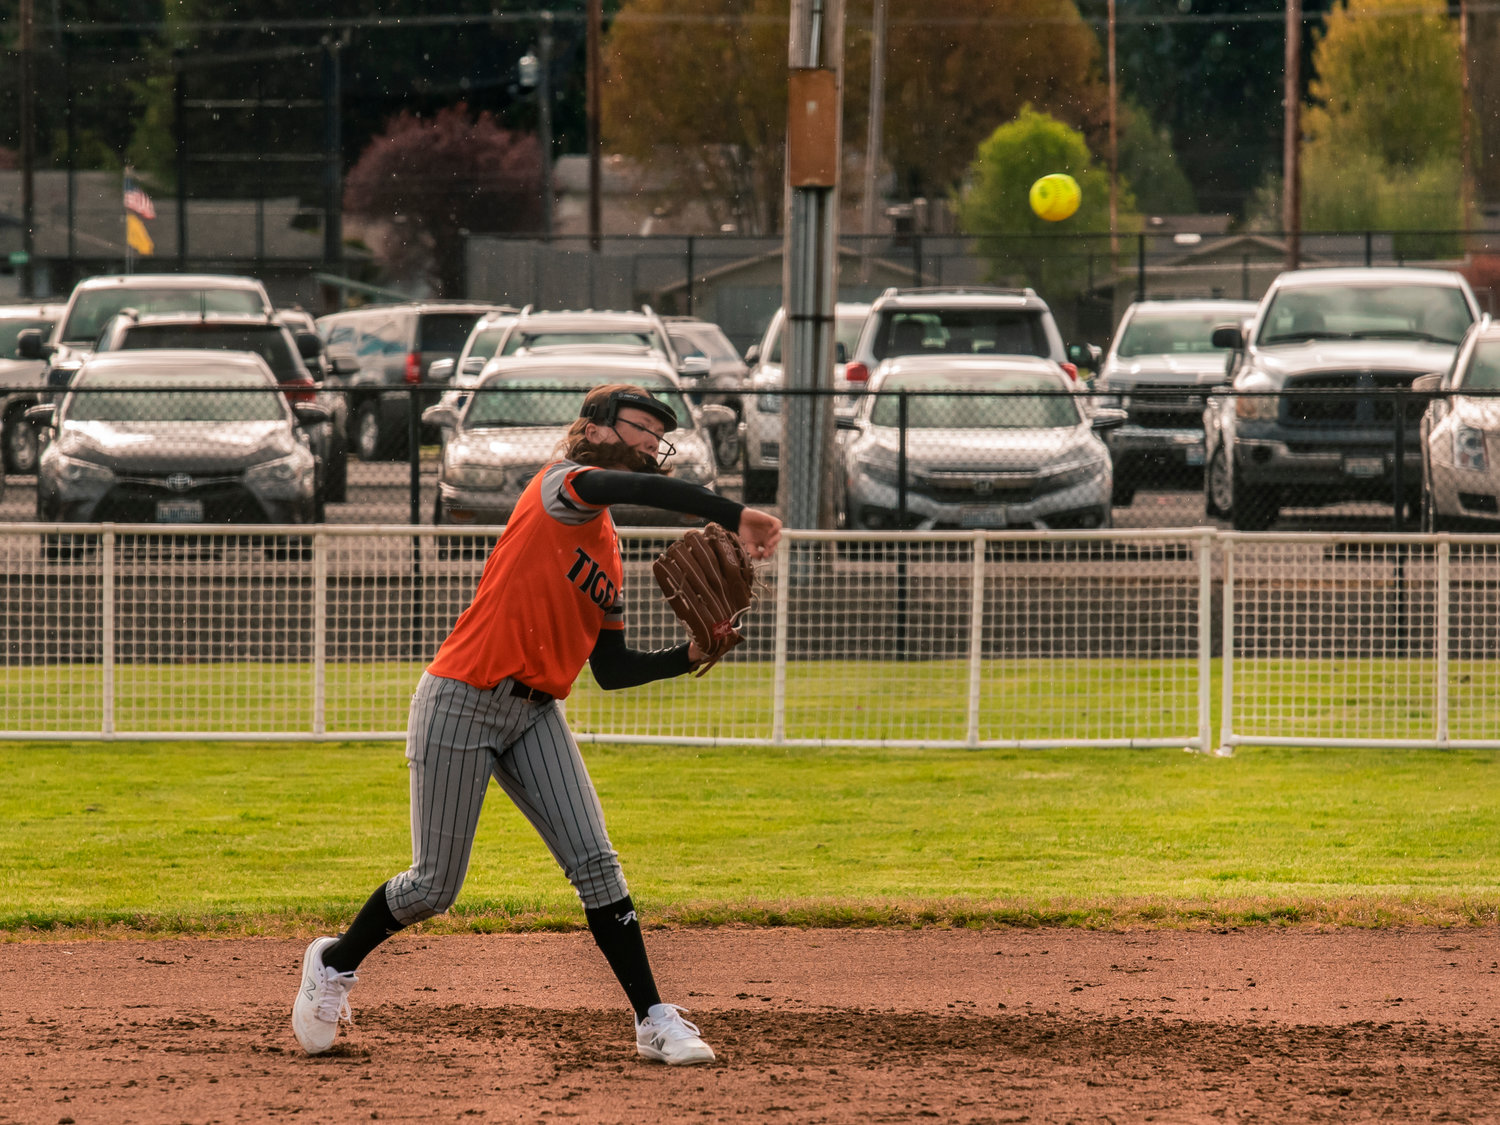 A Centralia infielder makes a throw to first base after fielding a grounder.